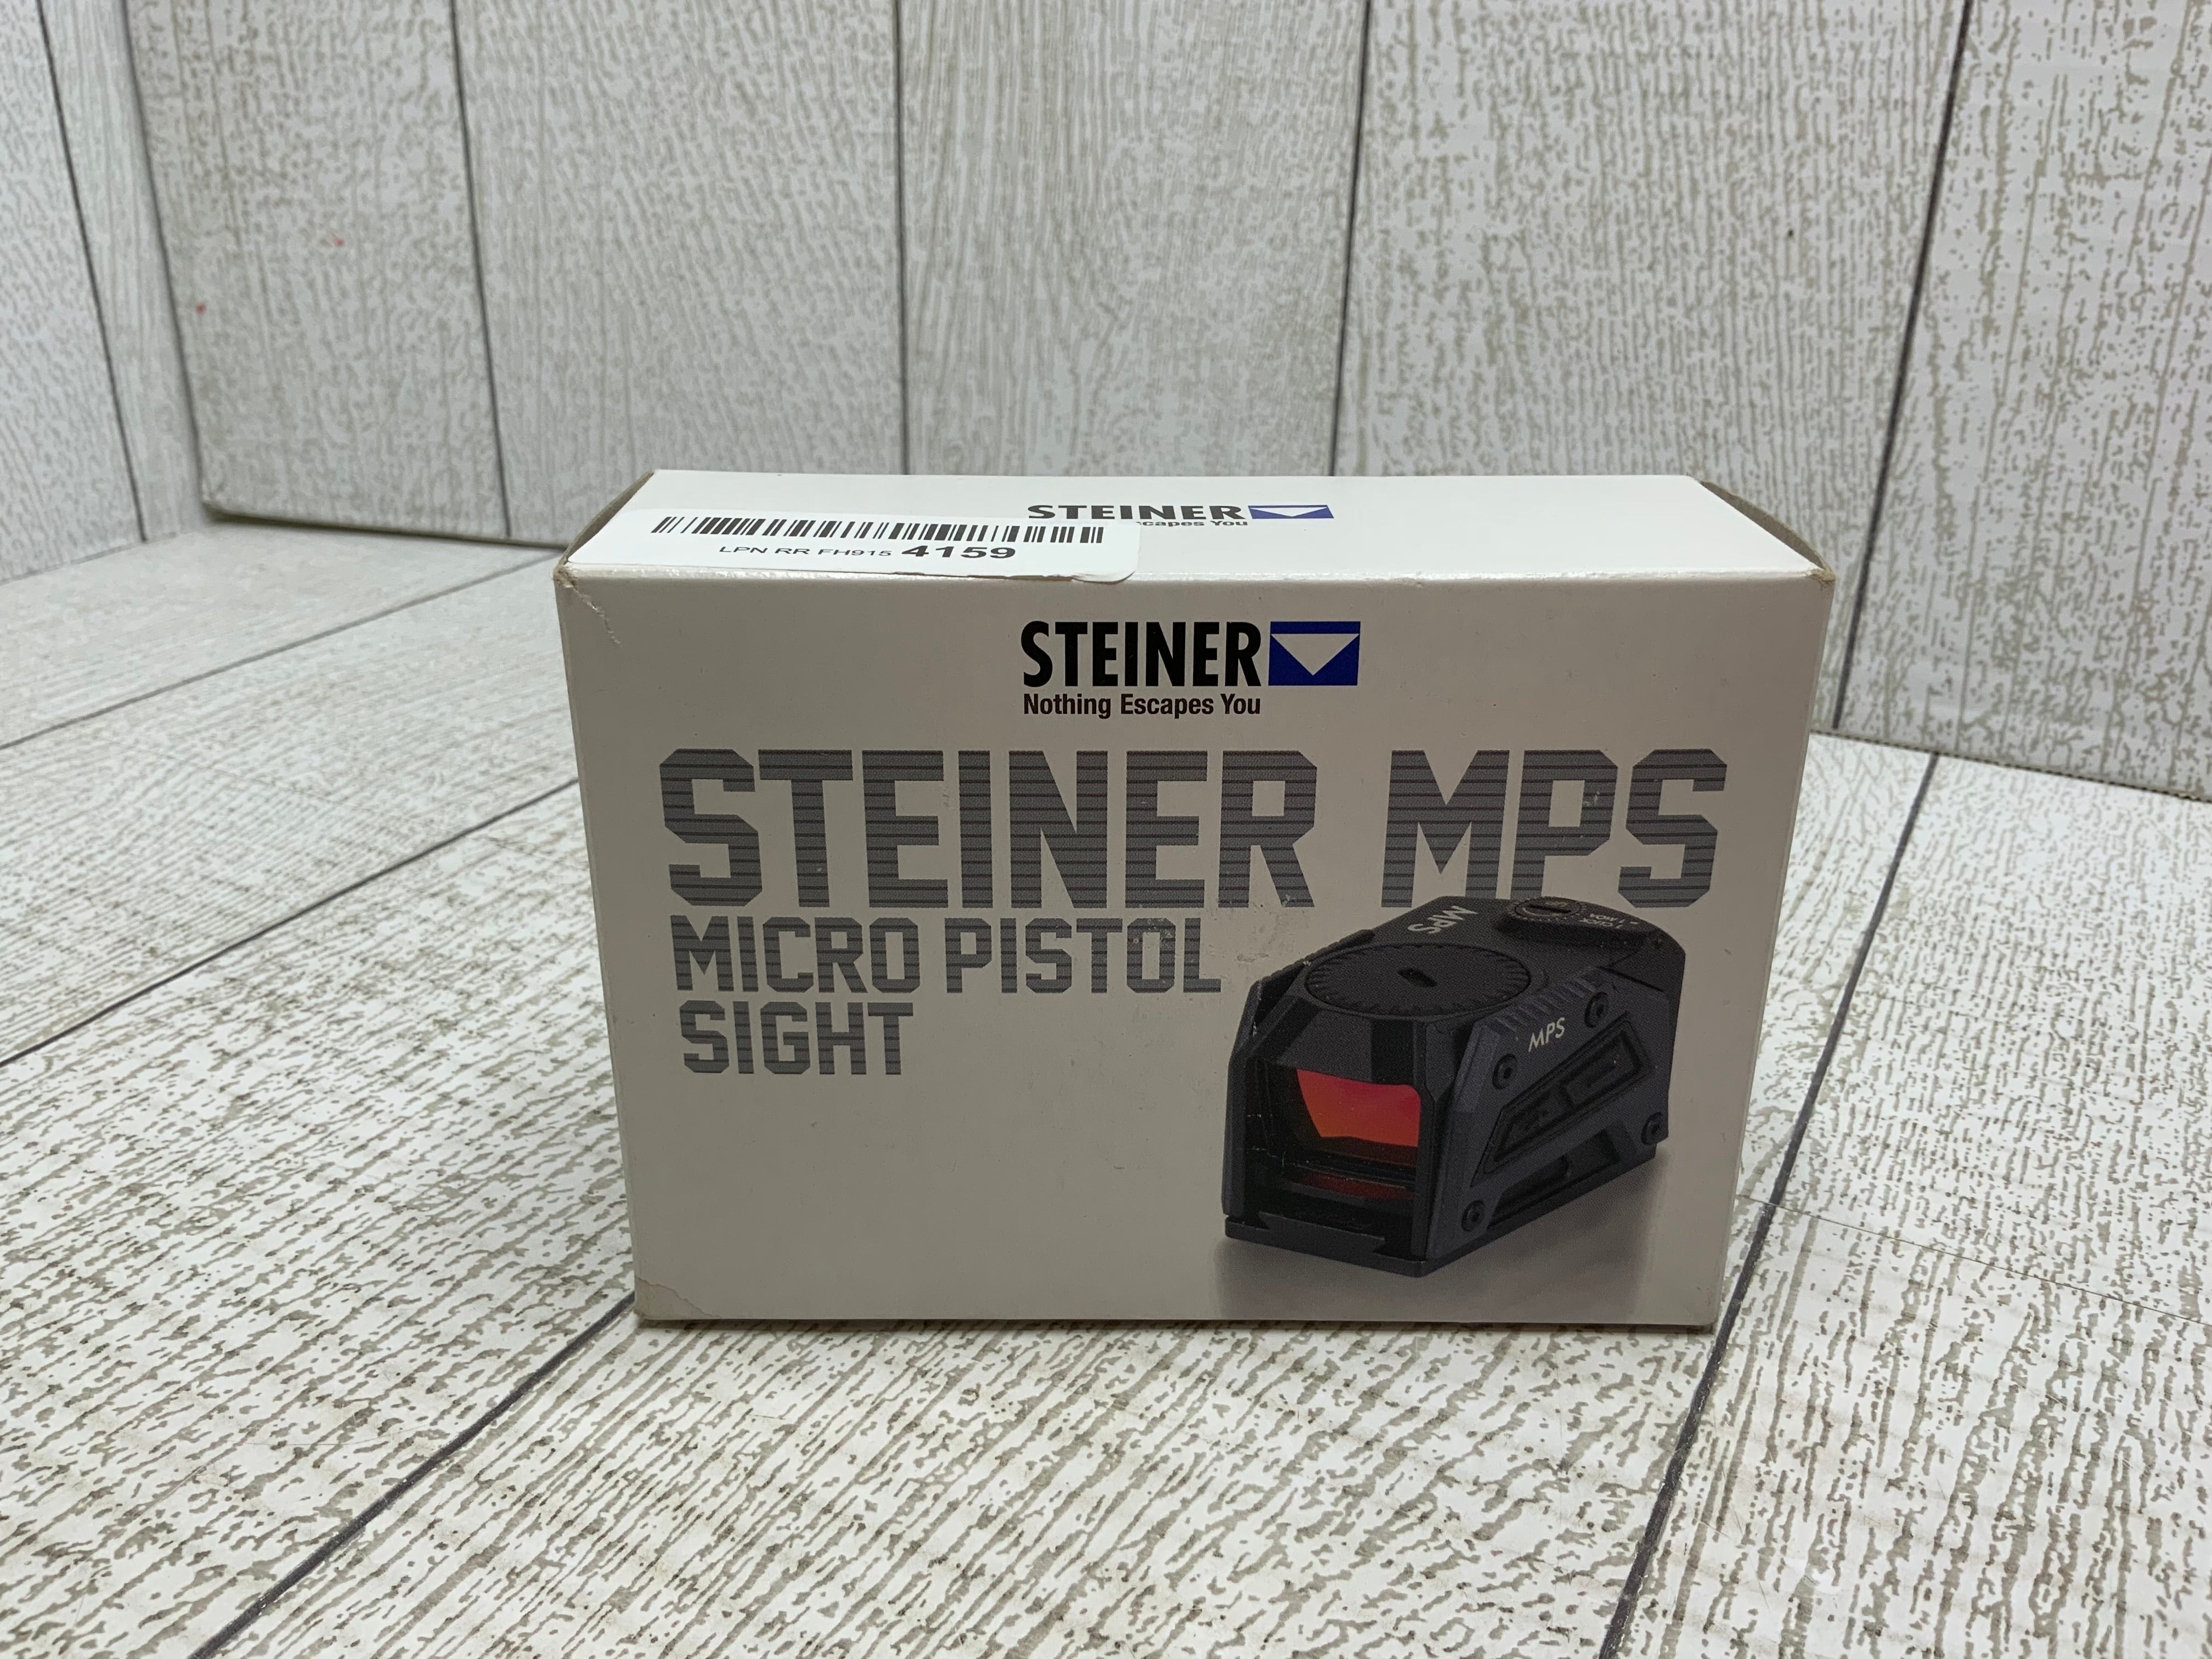 Steiner MPS Micro Pistol Sight Handgun Red Dot Sight with 1x Magnification (8050762711278)